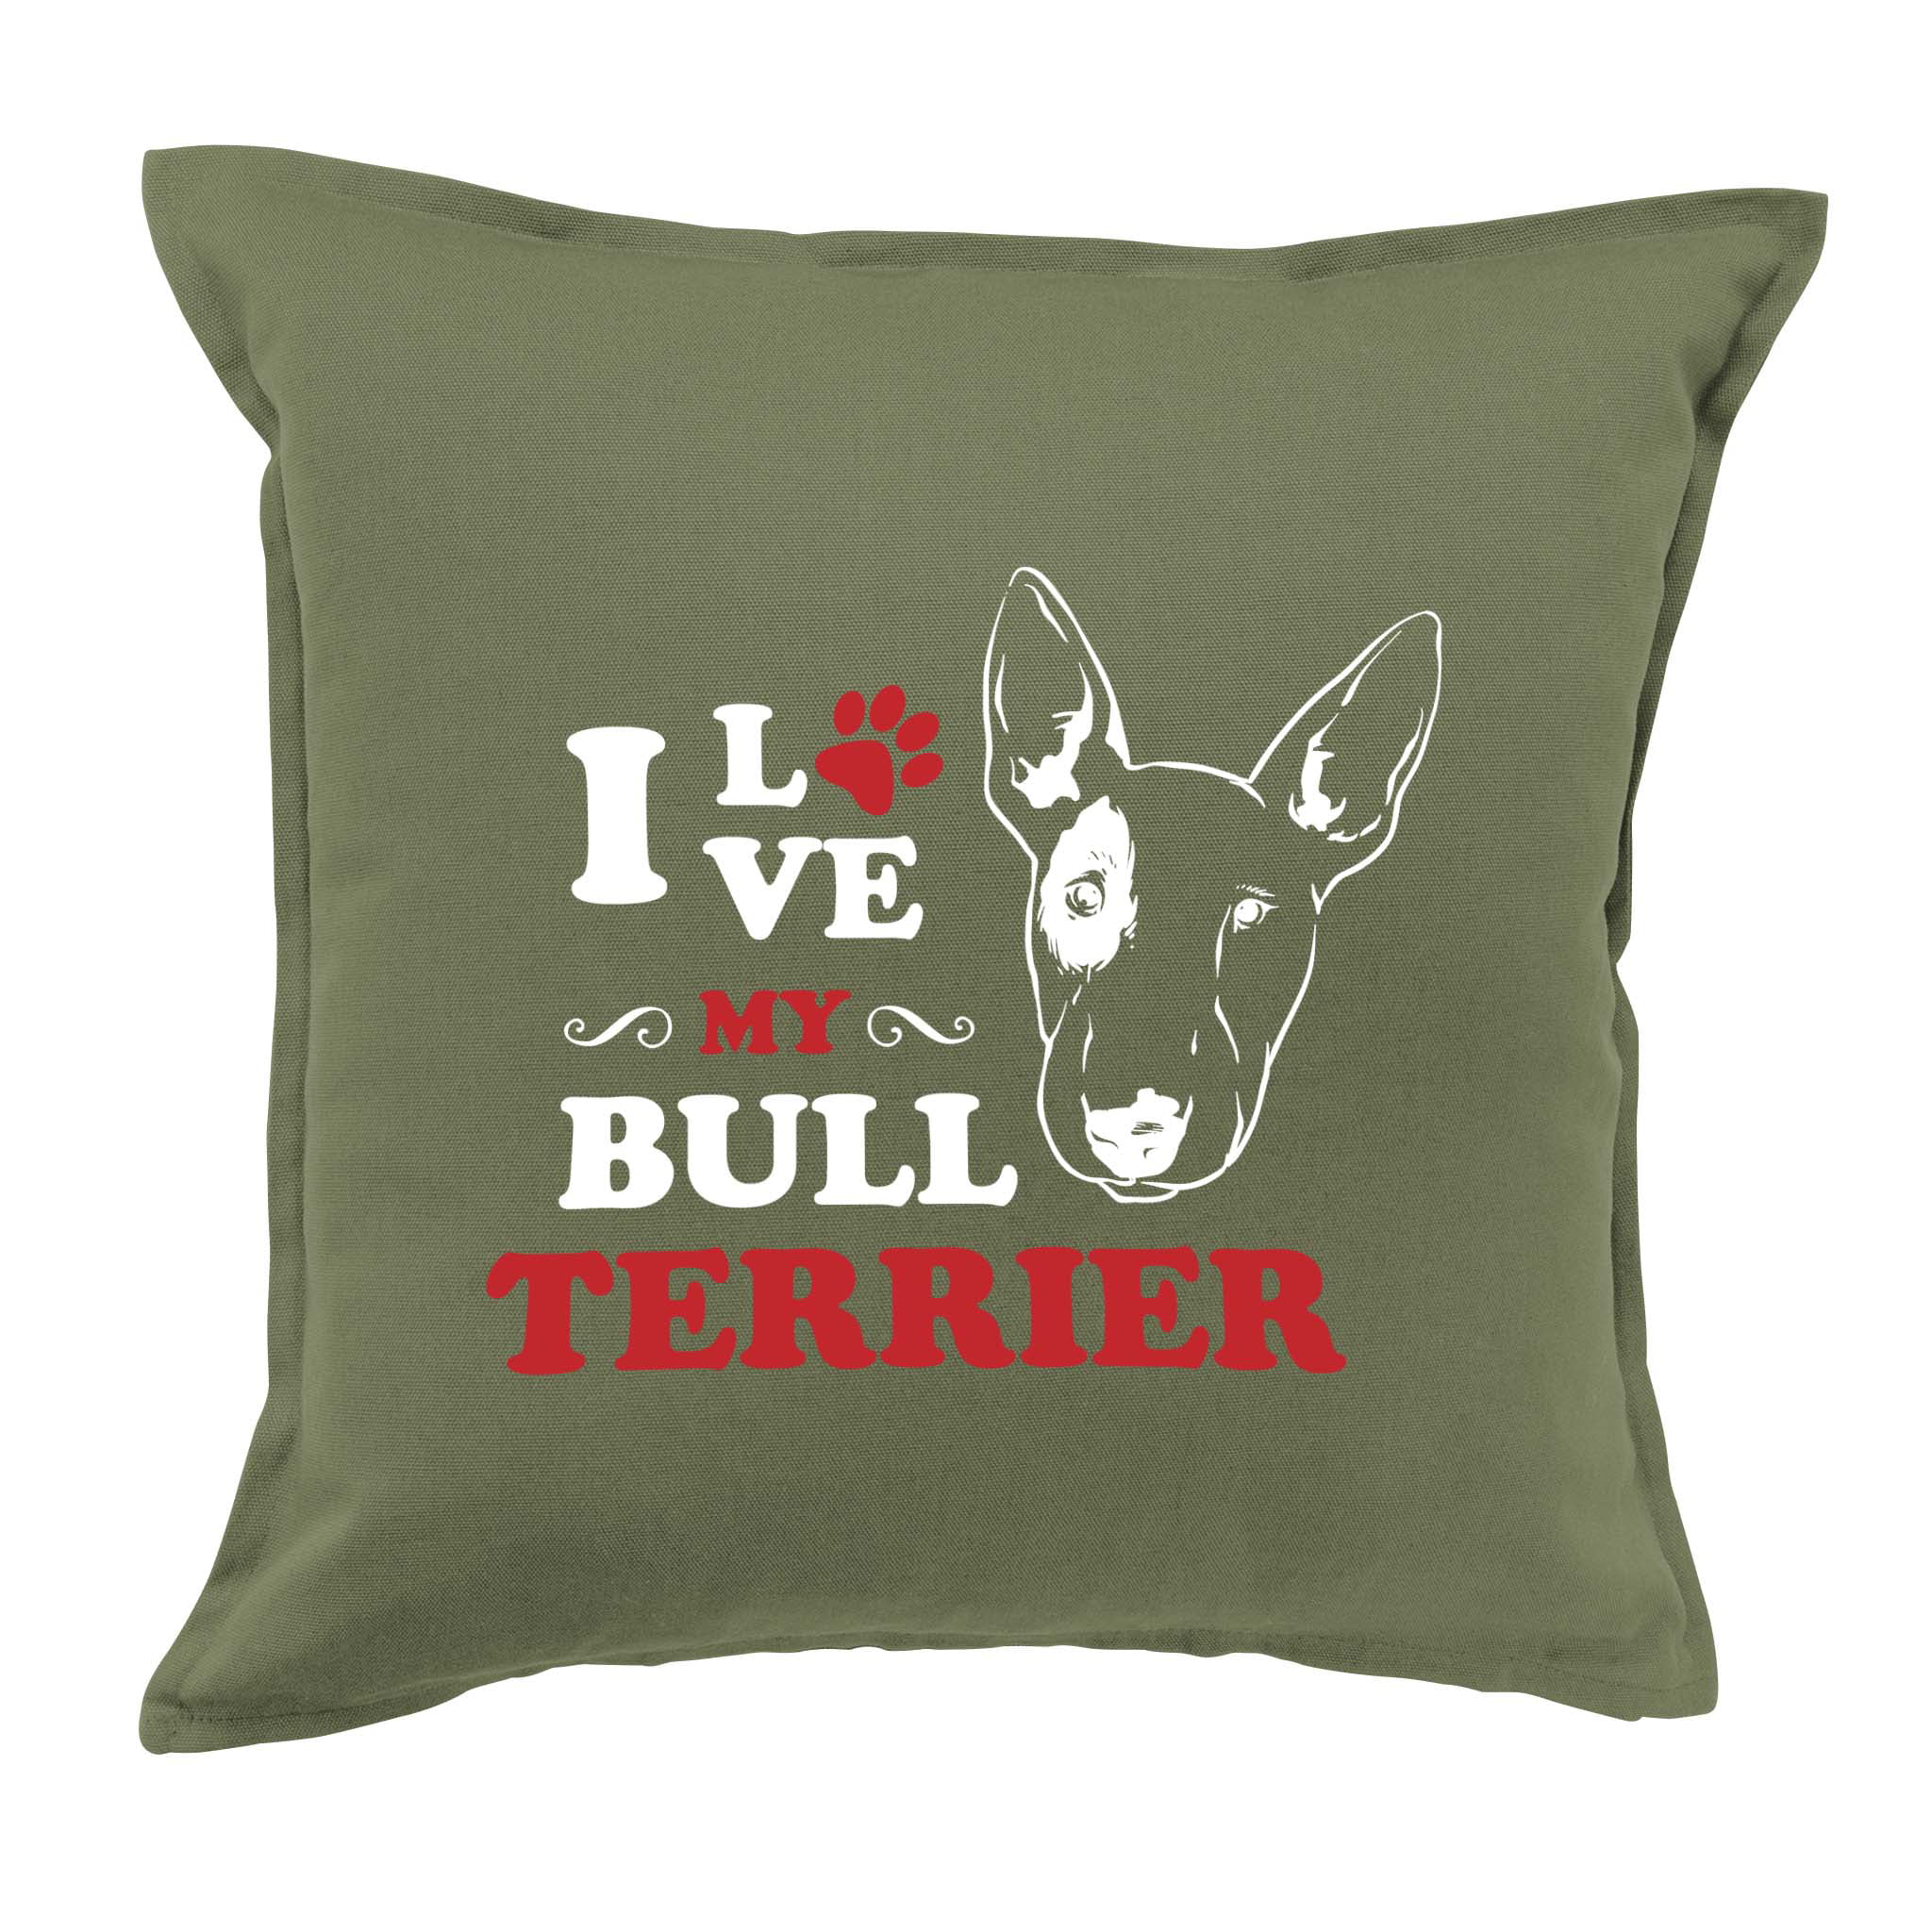 Linen Cotton Rustic Bull Terrier Natural Dog Cushion Cover Case Pillow Home Gift